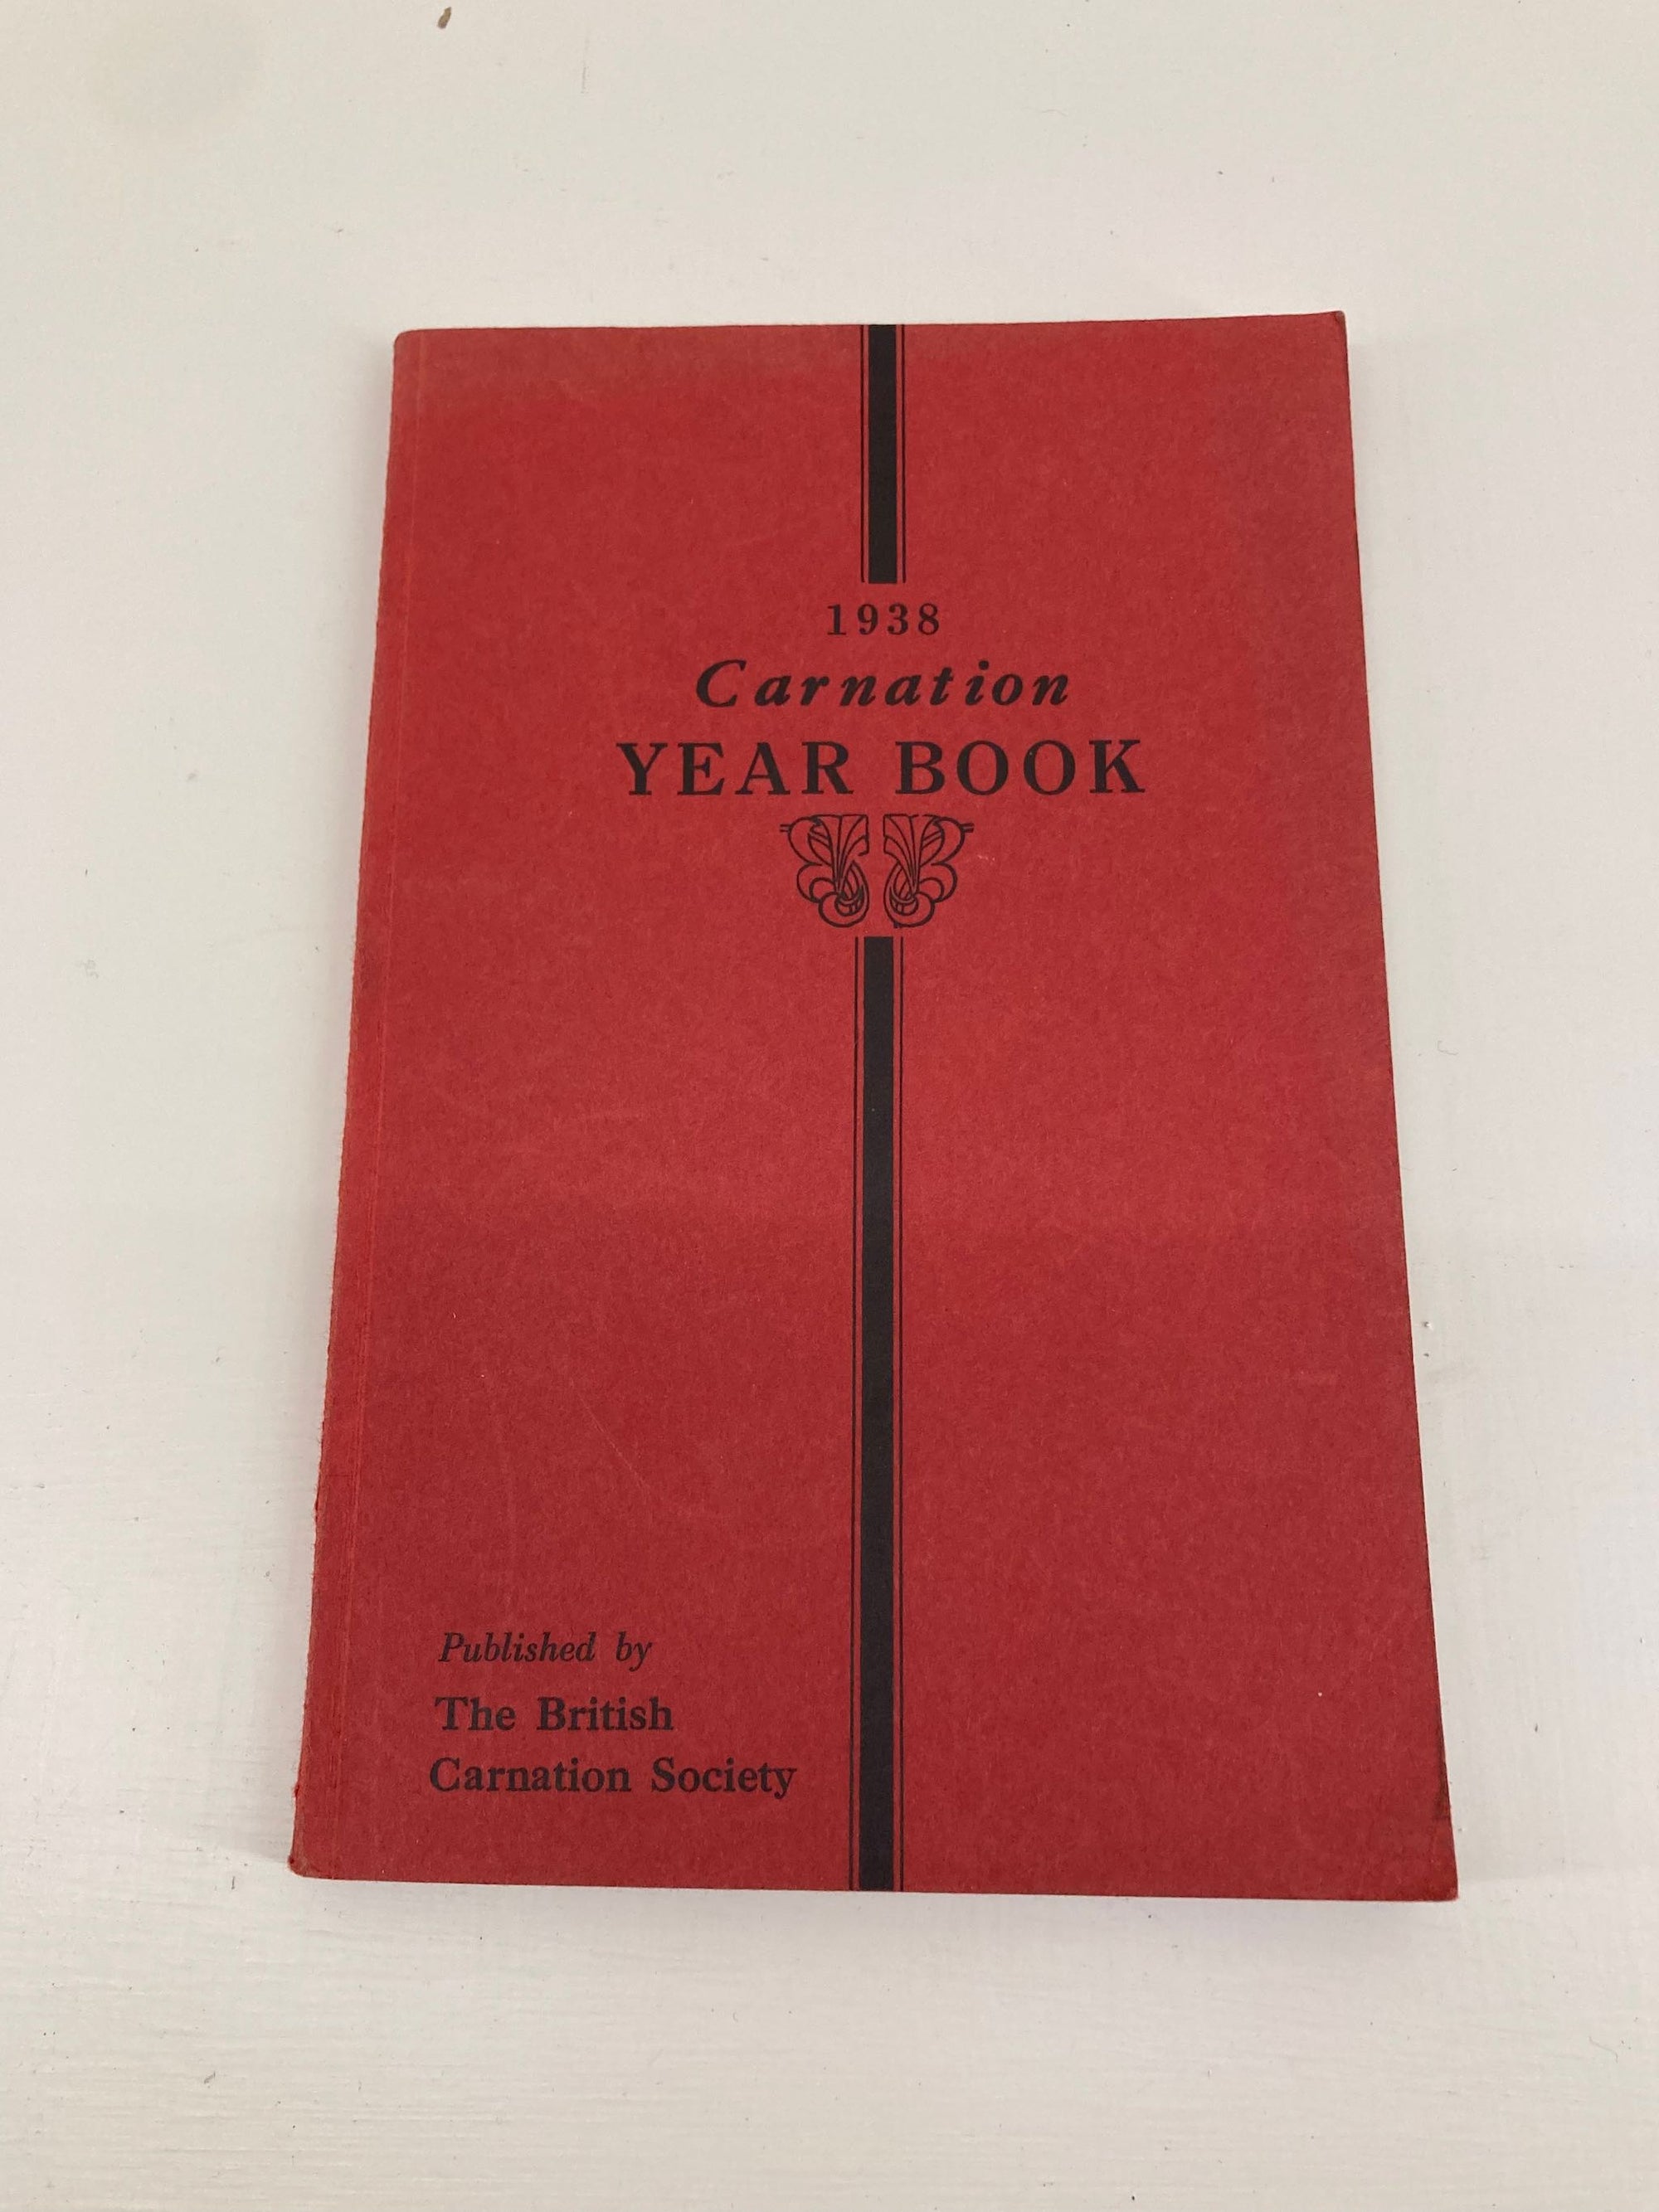 Carnation Year Book for 1938